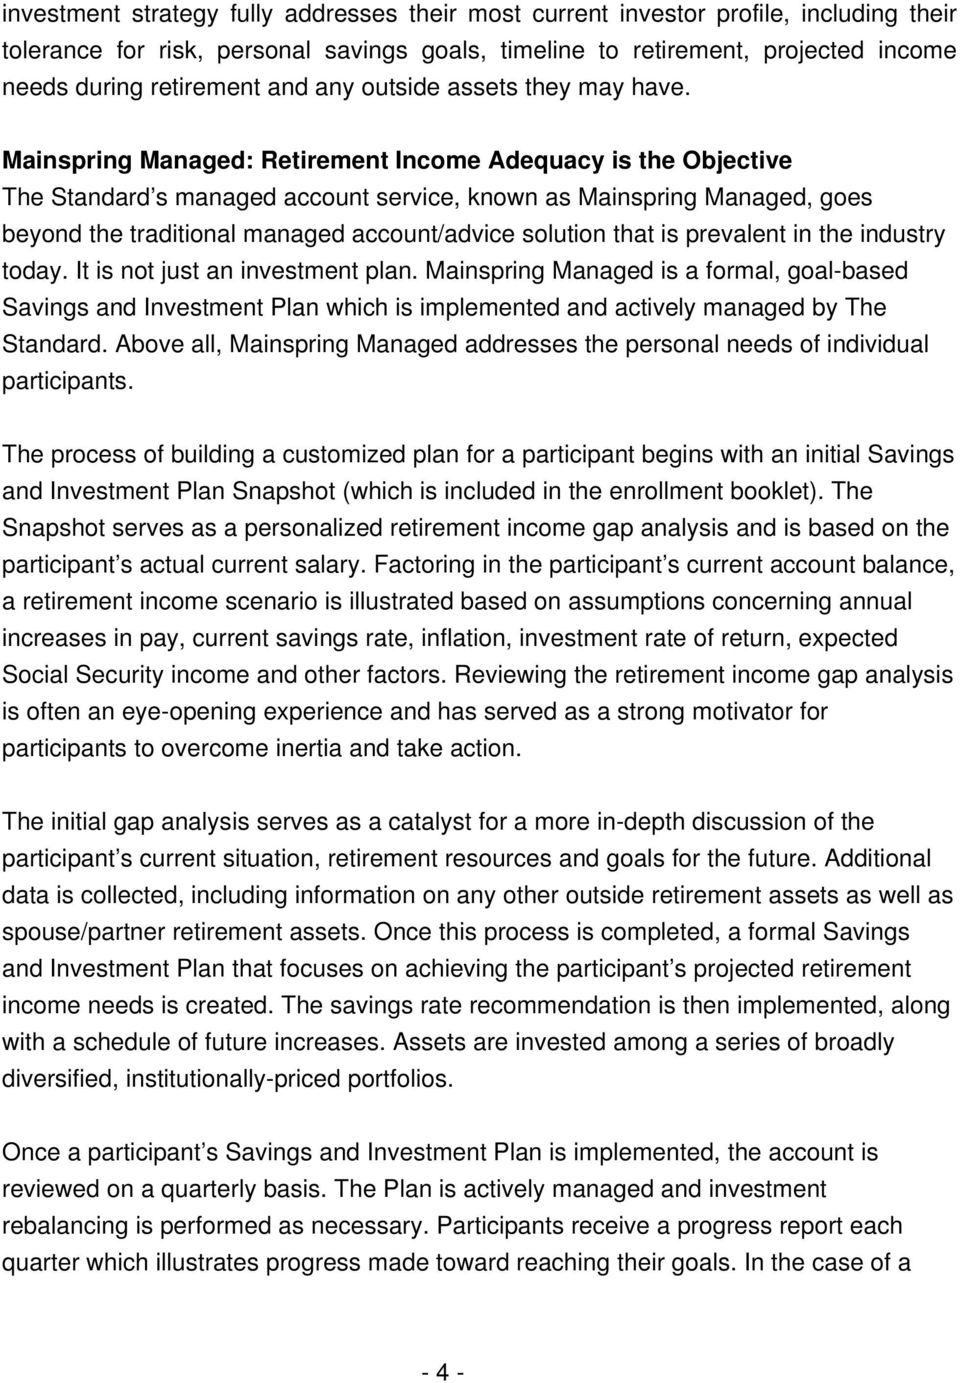 Mainspring Managed: Retirement Income Adequacy is the Objective The Standard s managed account service, known as Mainspring Managed, goes beyond the traditional managed account/advice solution that